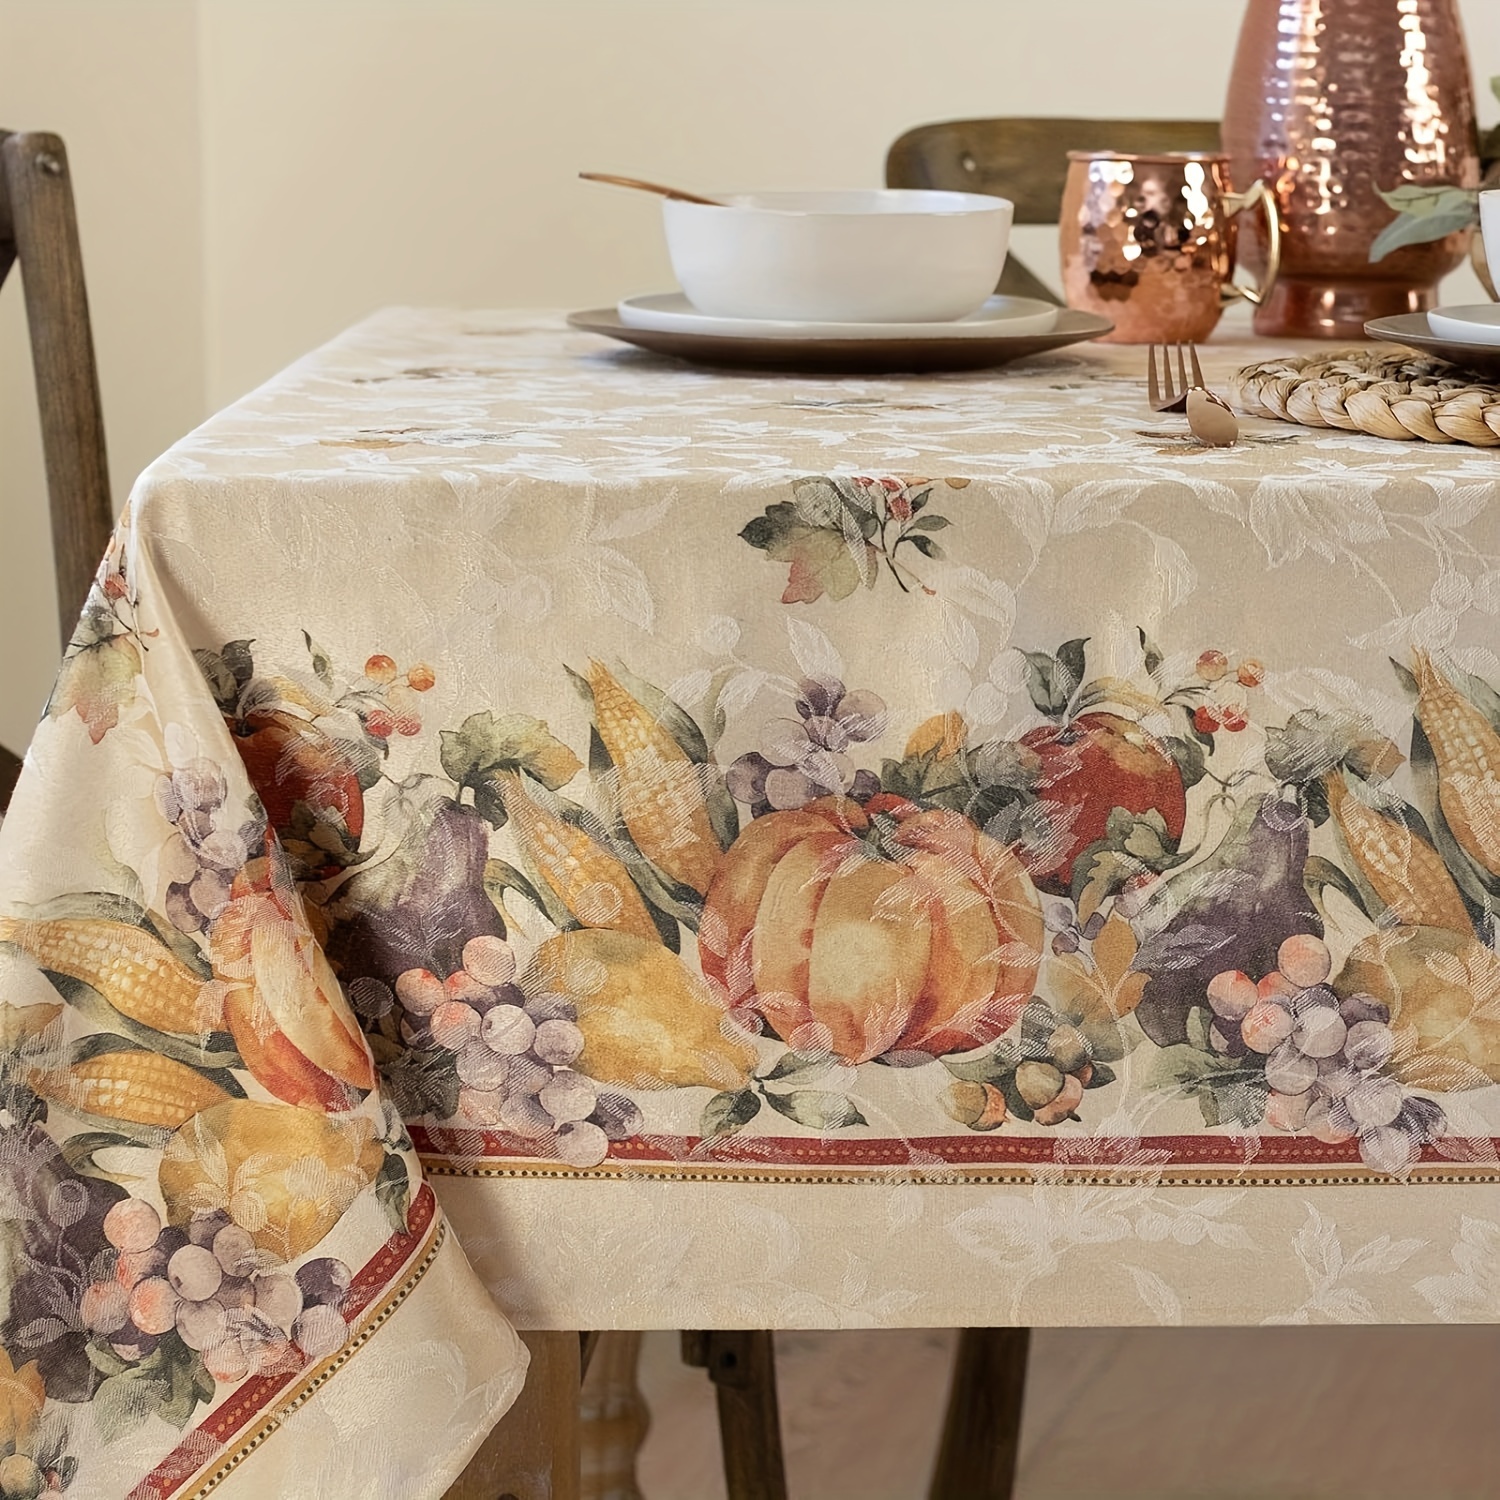 

Autumn Harvest Thanksgiving Tablecloth - 55x71 Inches, Easy-care Polyester With Vibrant Vegetable Design, Perfect For Fall Parties & Family Gatherings